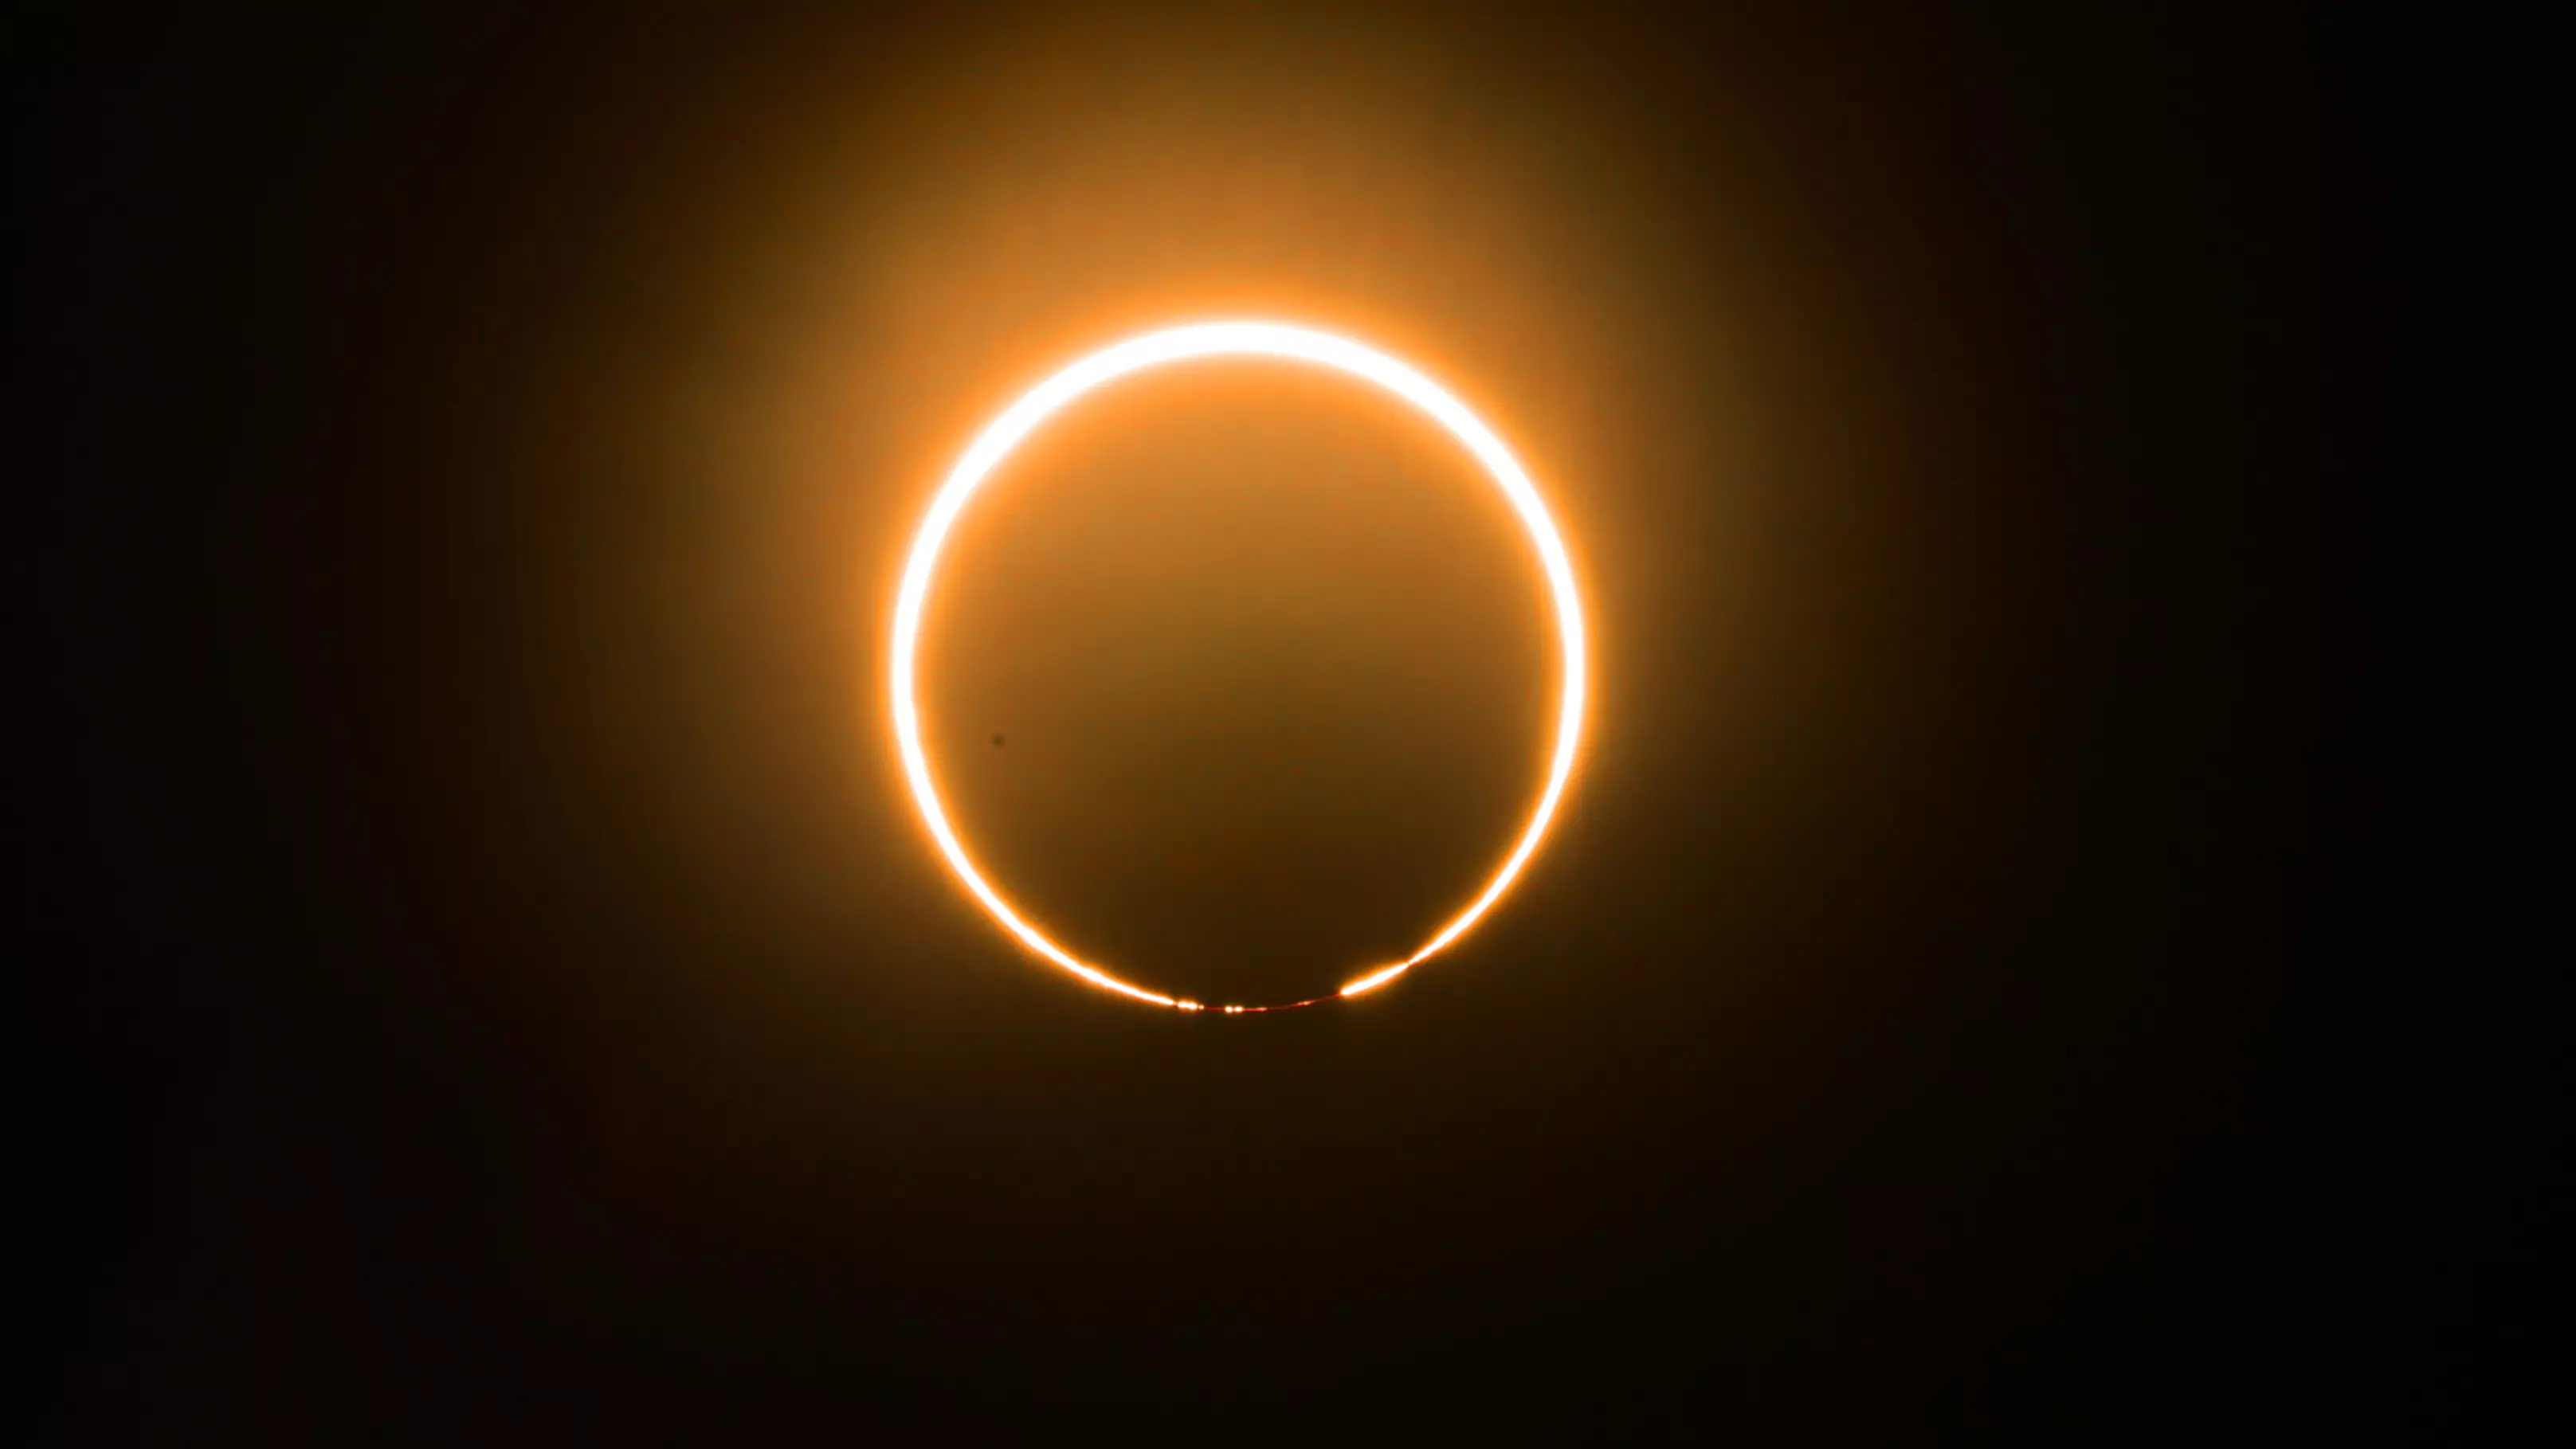 Amazing Photos Show Rare Solar Eclipse That Happened This Weekend